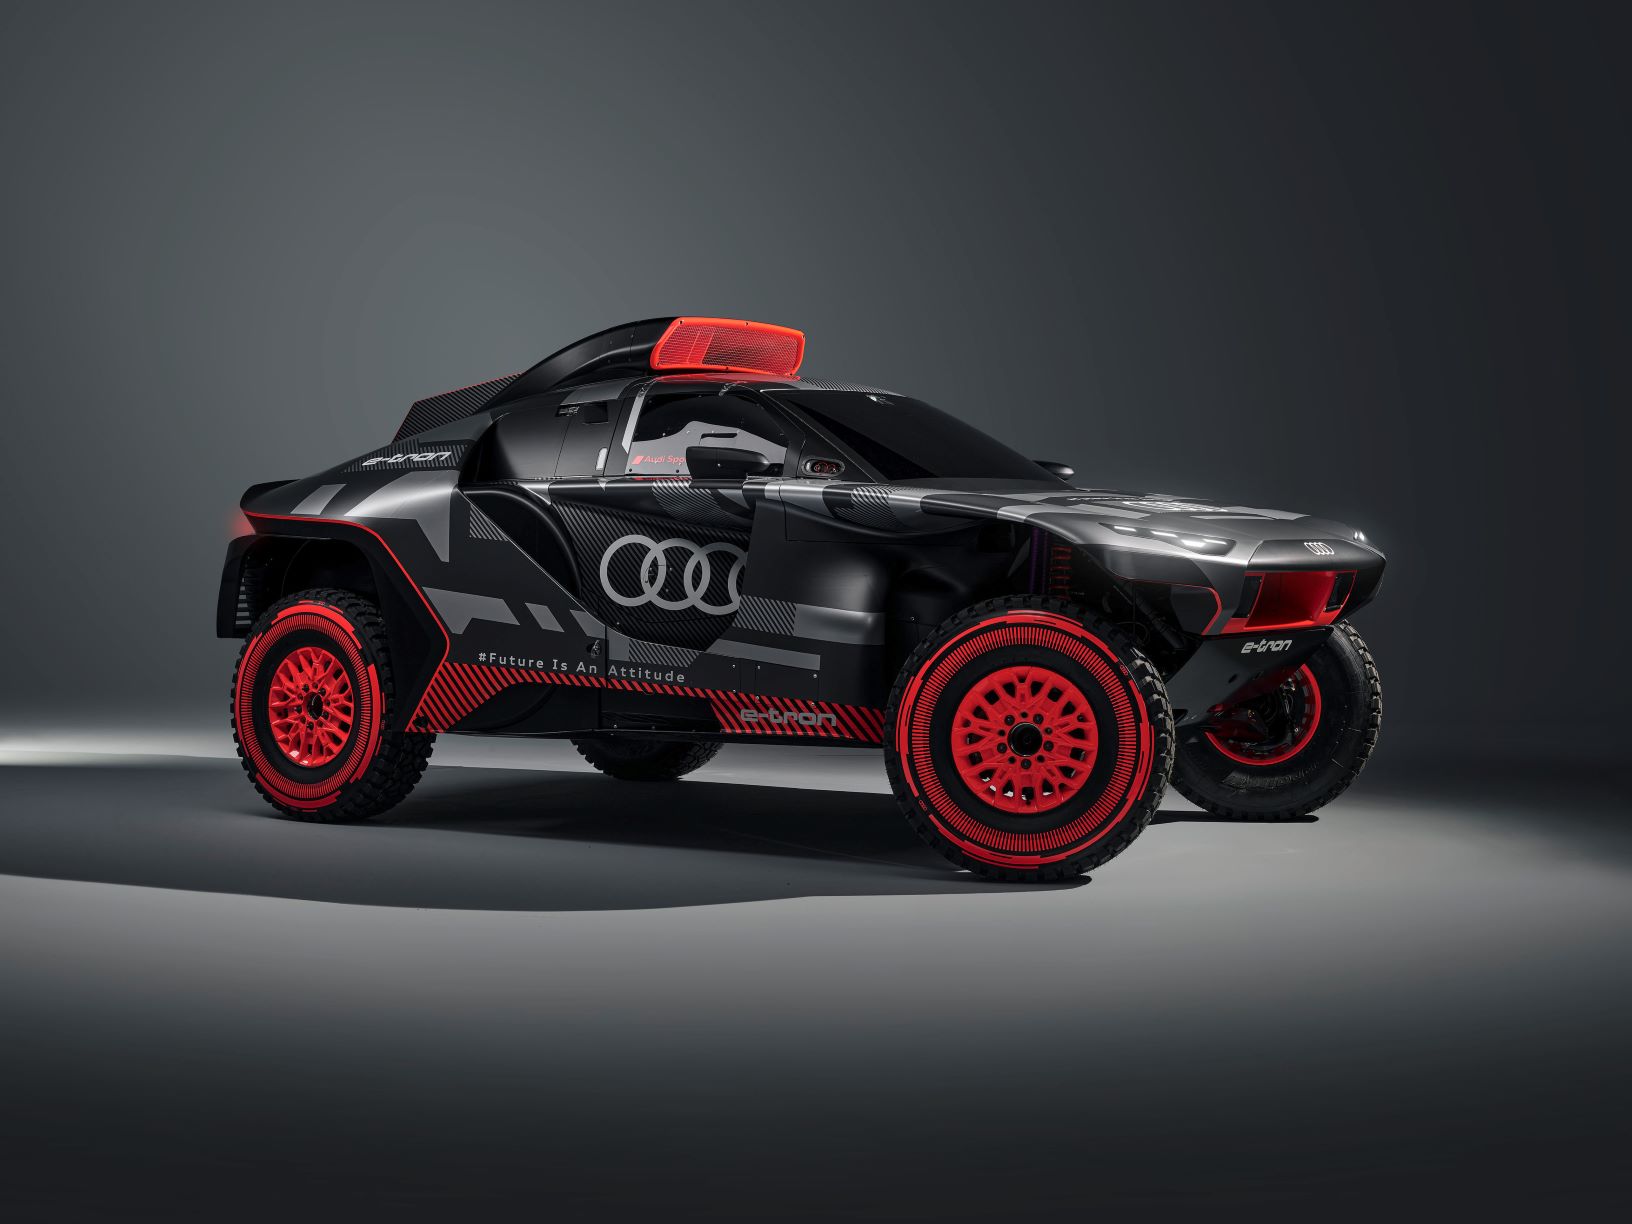 Front view of Audi's RS Q e-tron